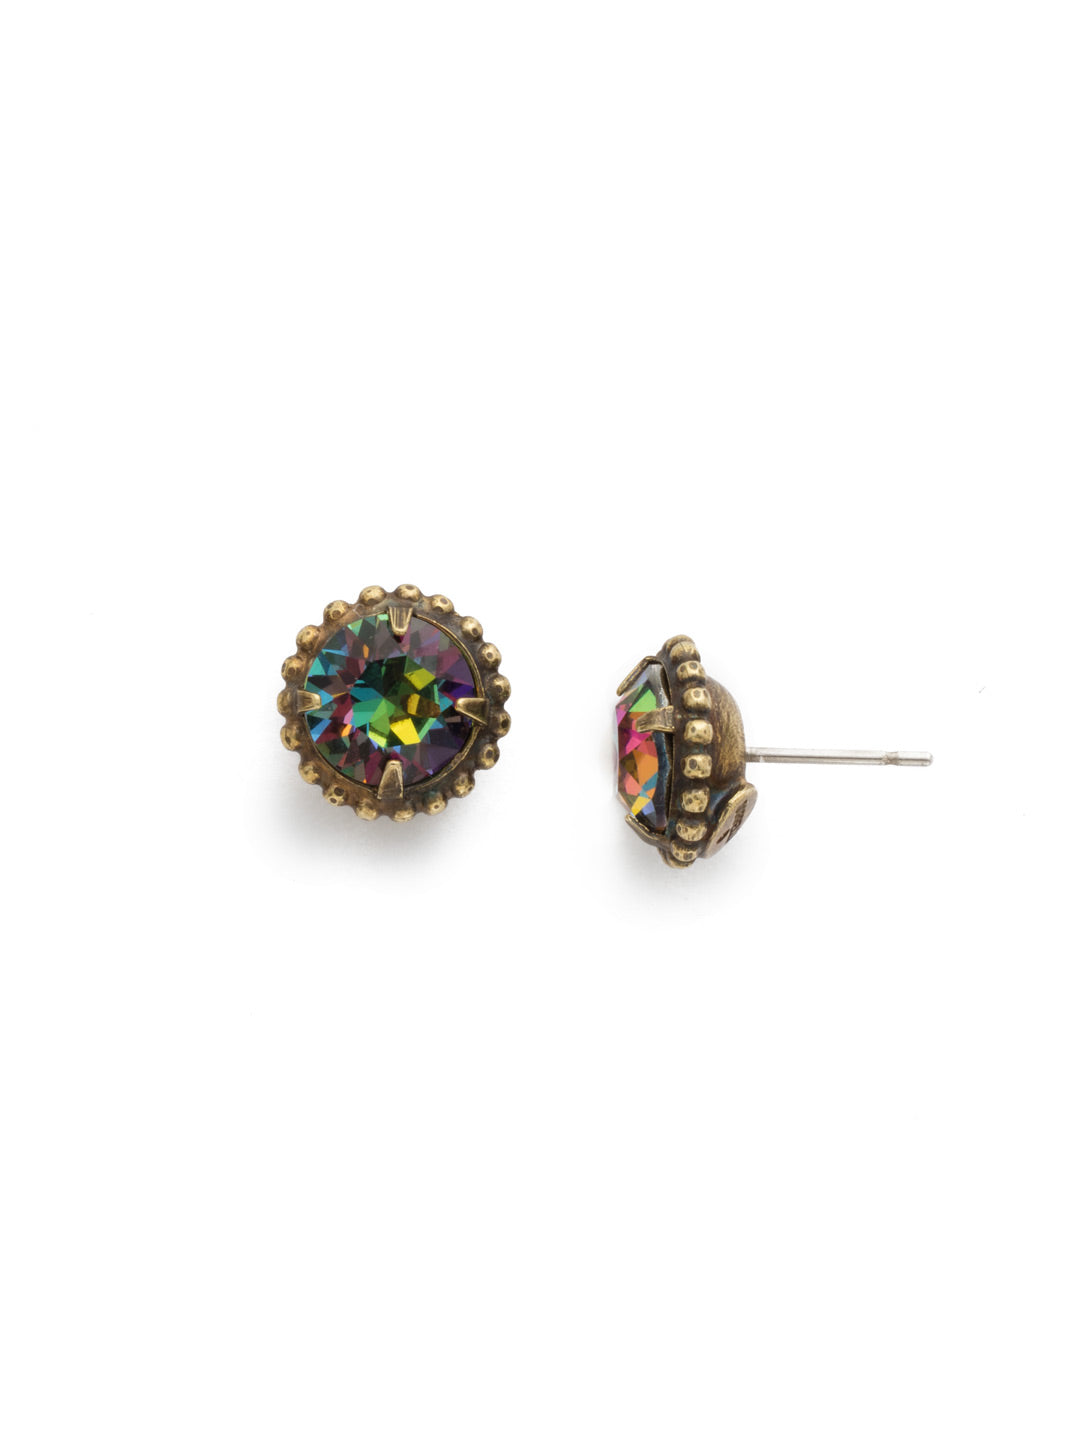 Simplicity Stud Earrings - EBY38AGVO - <p>A timeless classic, the Simplicity Stud Earrings feature round cut crystals in a variety of colors; accented with a halo of metal beaded detail. Need help picking a stud? <a href="https://www.sorrelli.com/blogs/sisterhood/round-stud-earrings-101-a-rundown-of-sizes-styles-and-sparkle">Check out our size guide!</a> From Sorrelli's Volcano collection in our Antique Gold-tone finish.</p>